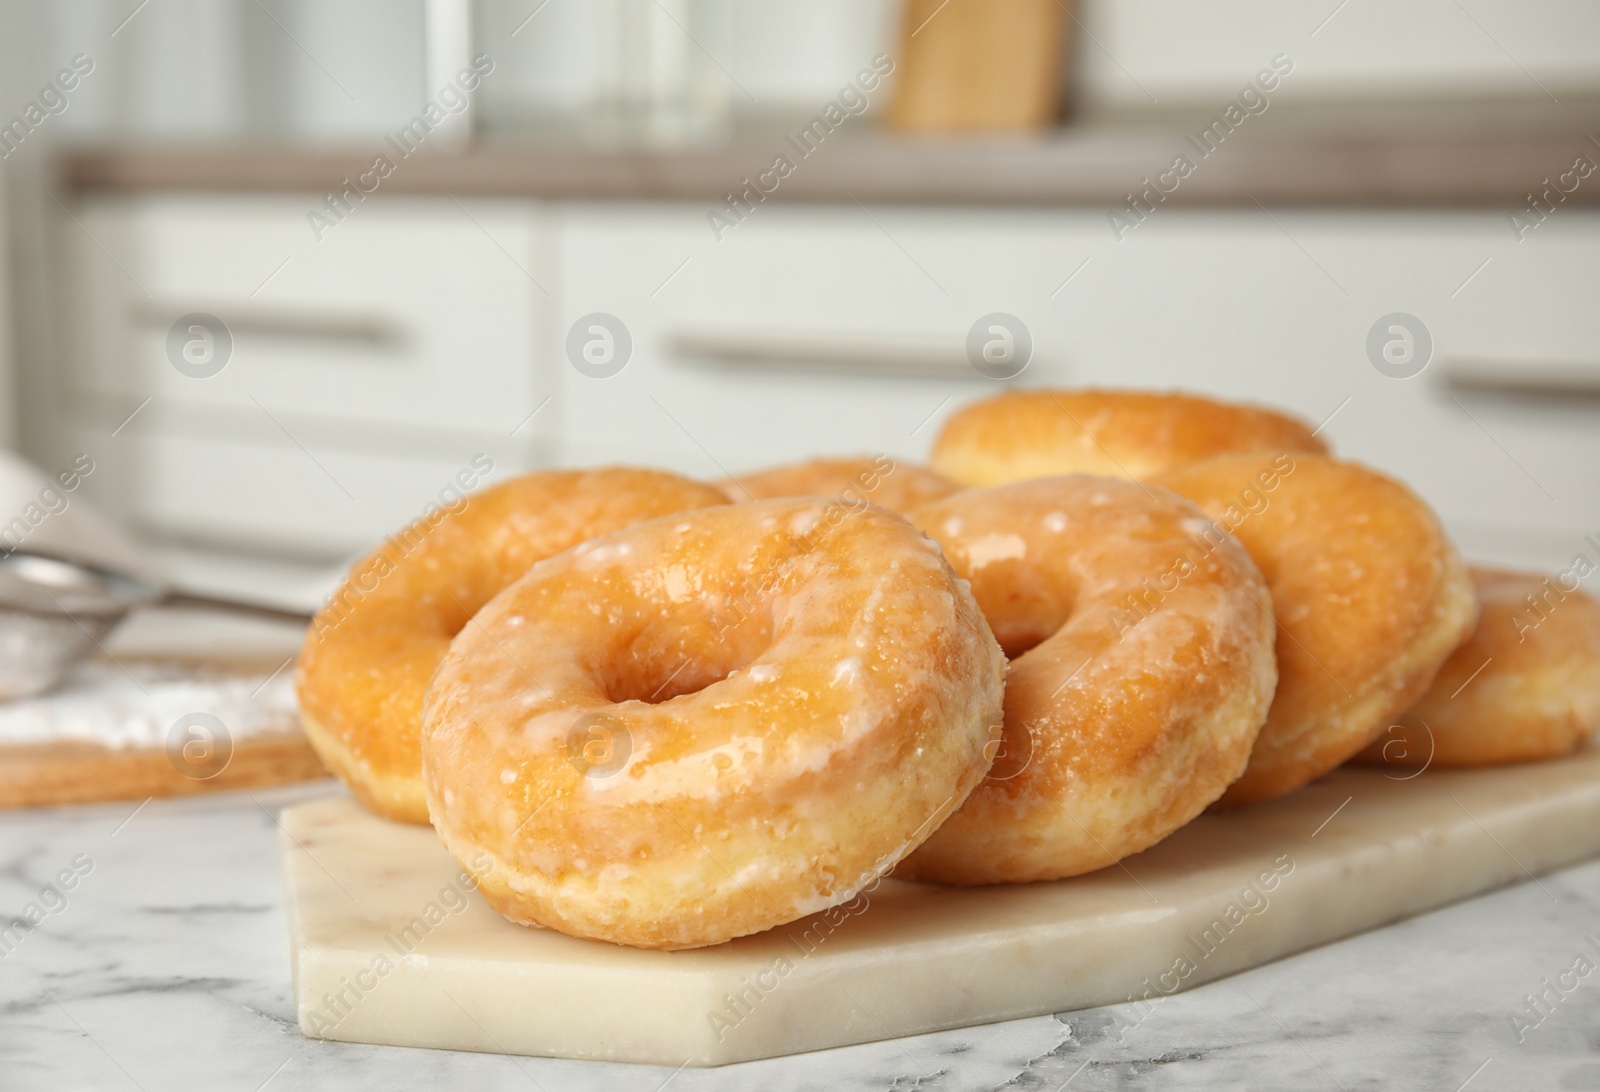 Photo of Delicious glazed donuts on marble table, closeup